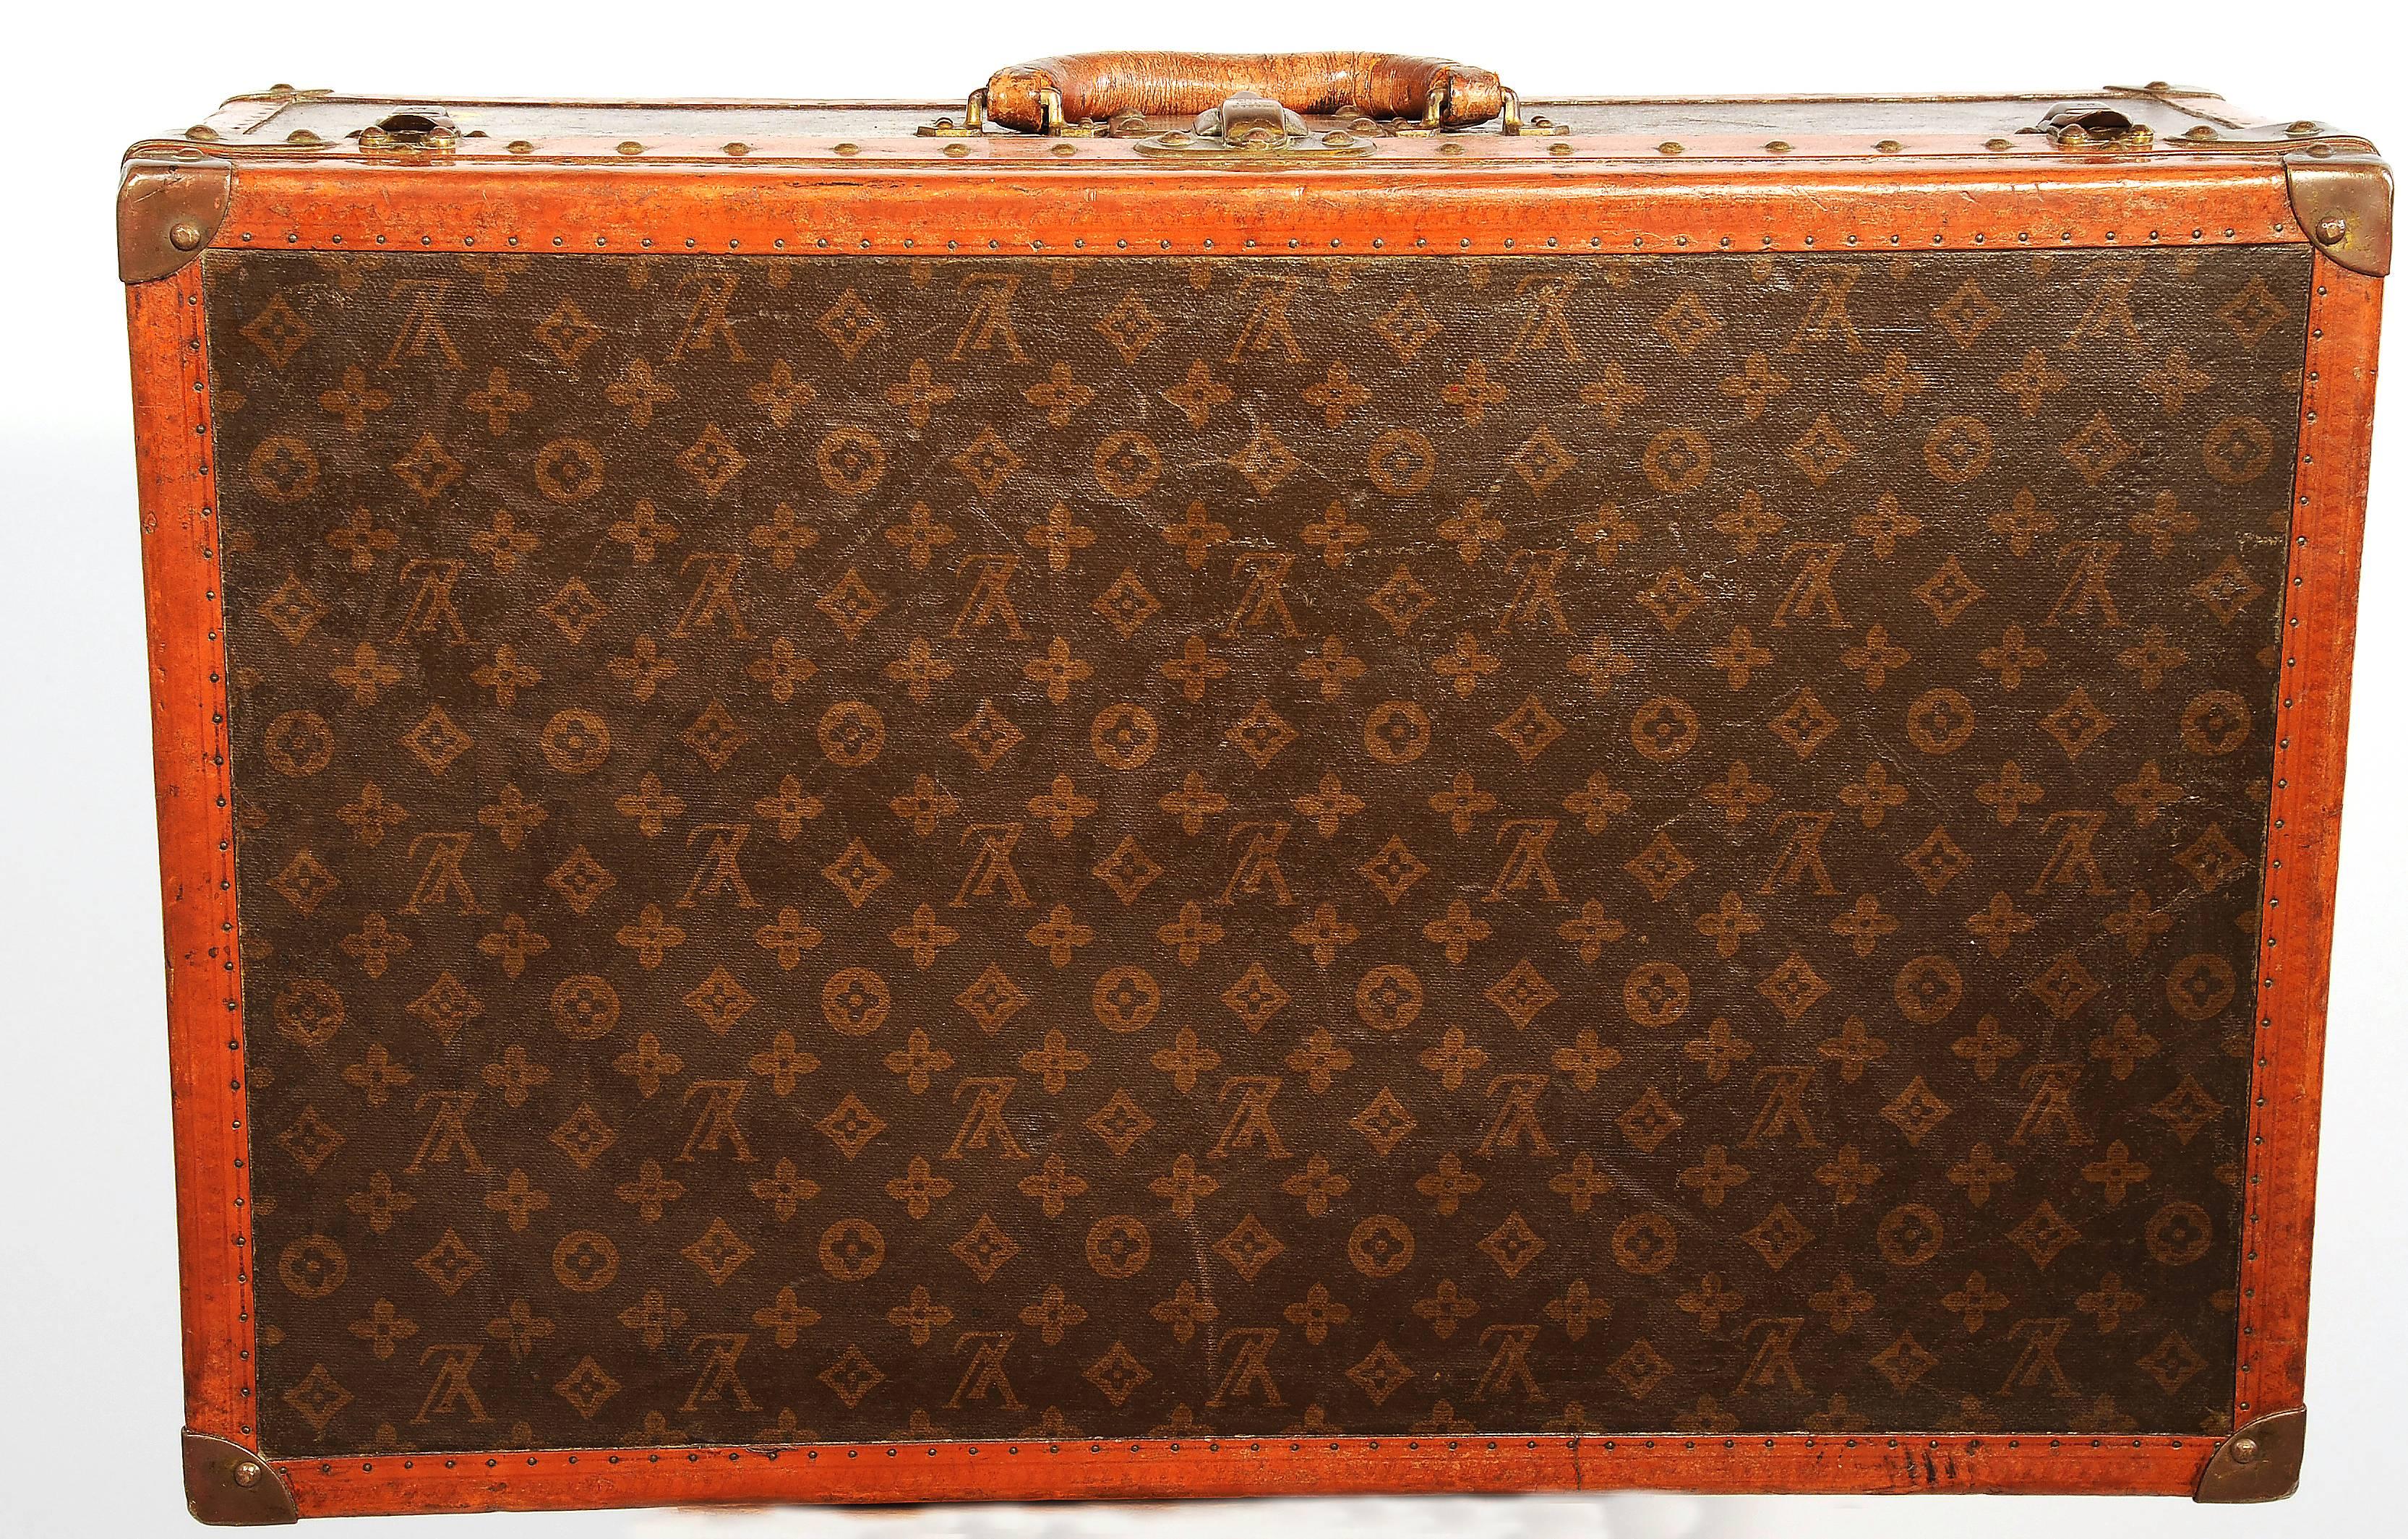 Brown  Louis Vuitton Suitcase Owned by Diana Vreeland Iconic Piece of Fashion History